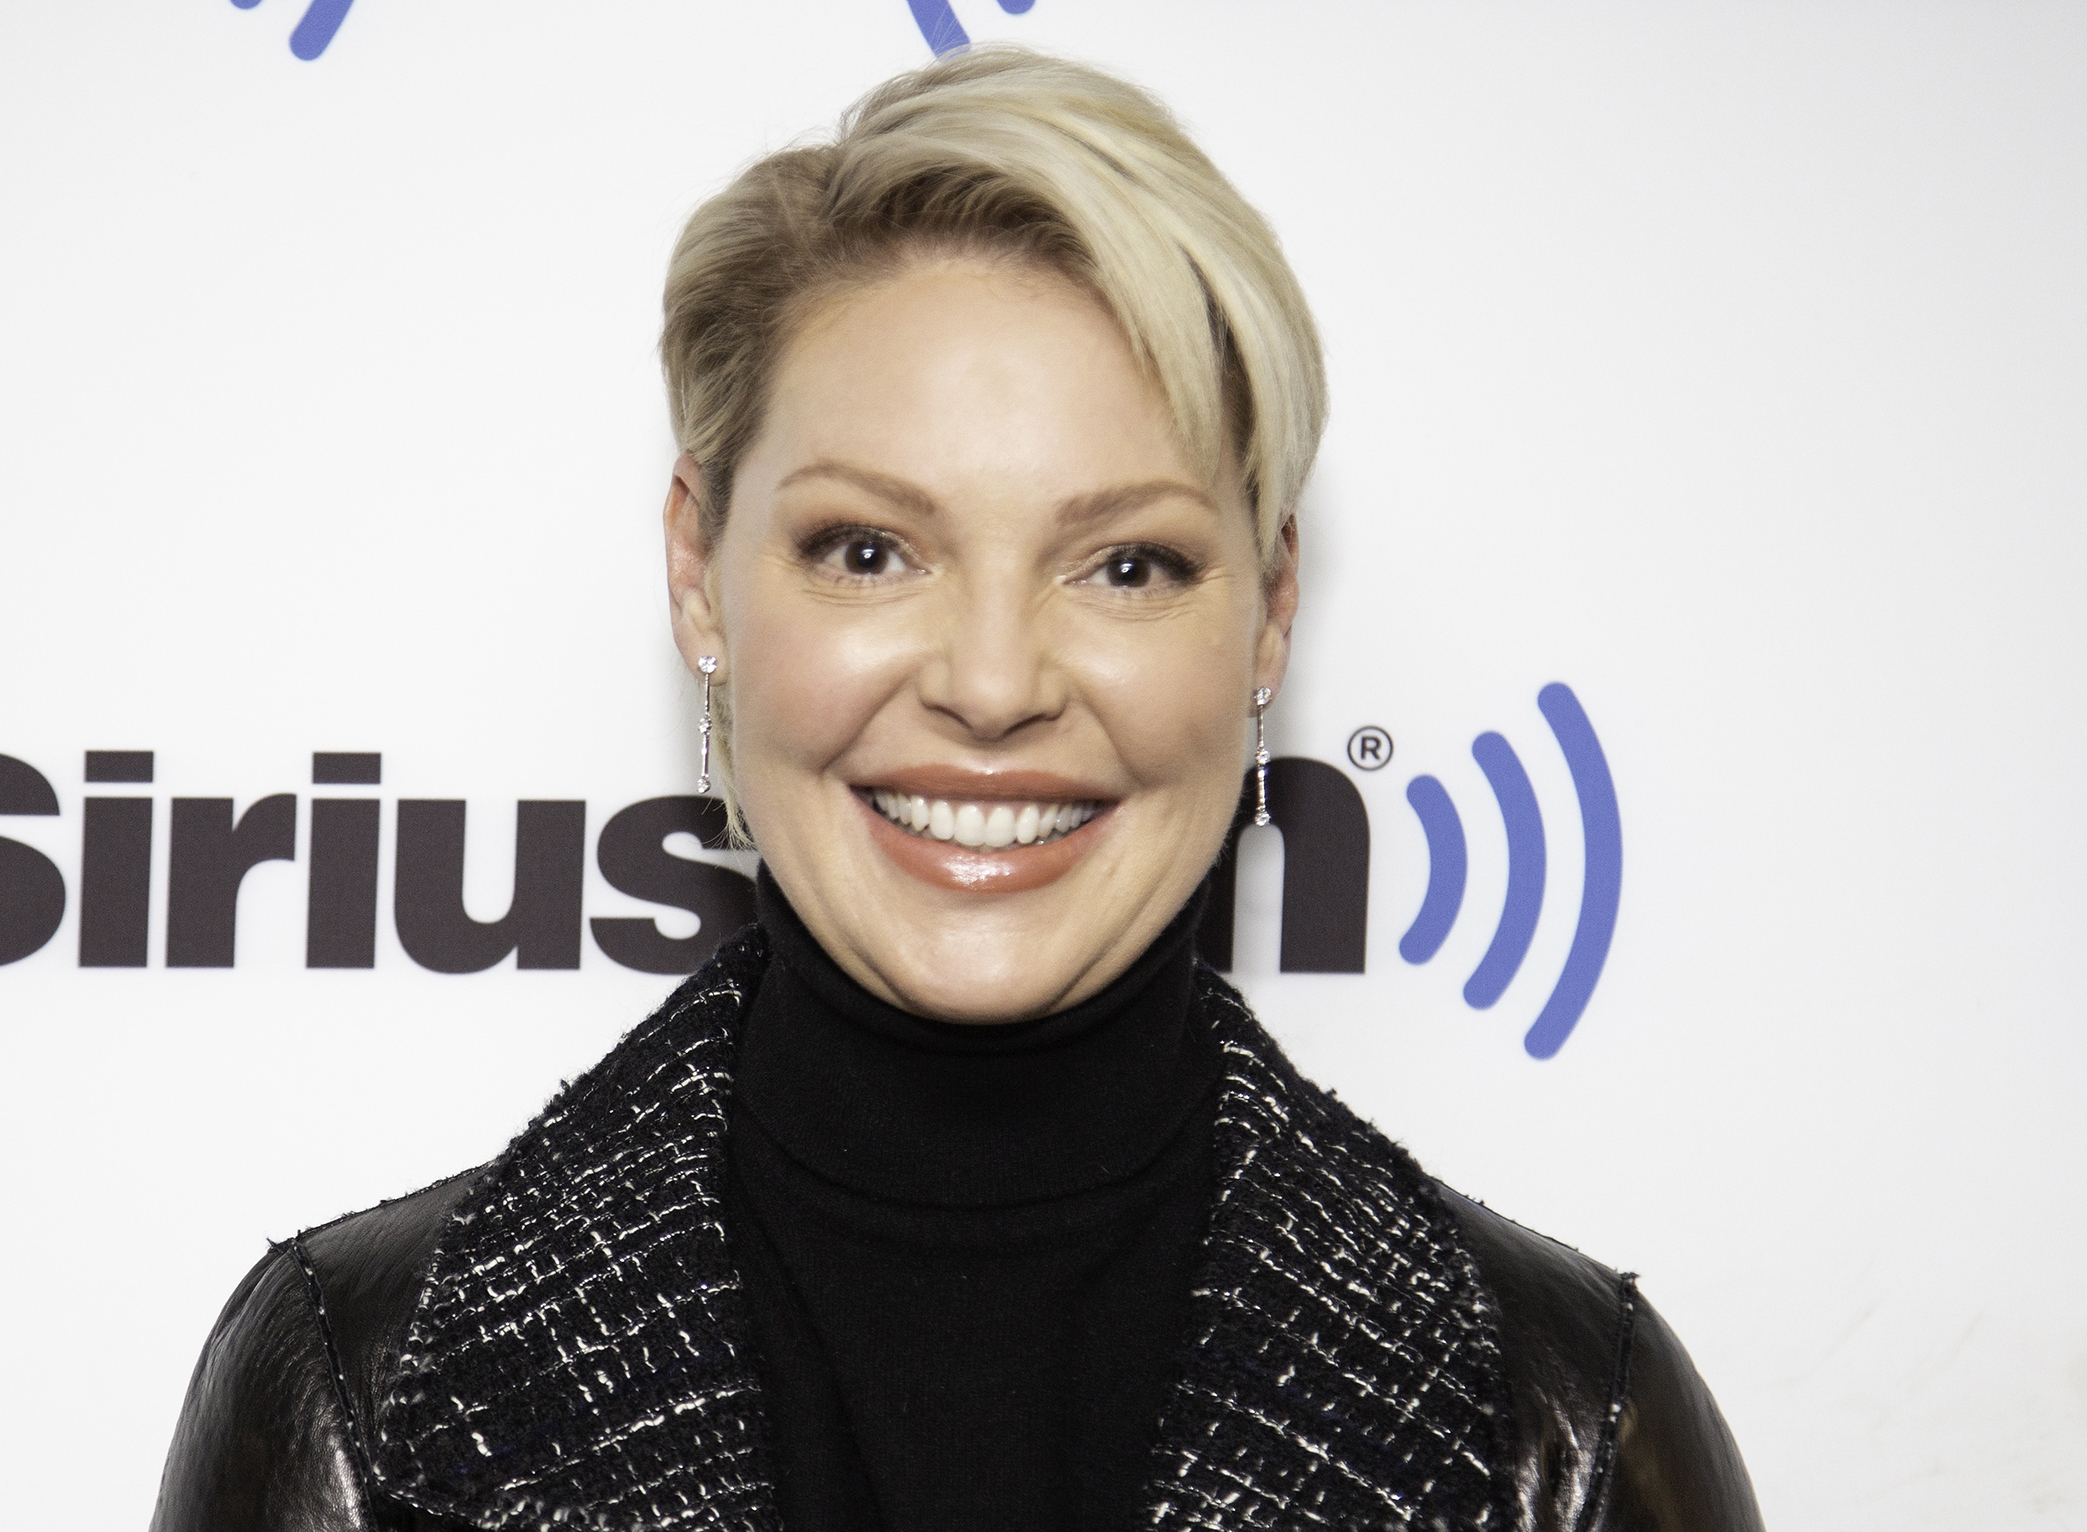 Katherine Heigl Discusses Moving Her Kids To Utah: ‘Didn’t Know How To Raise Them In L.A.’